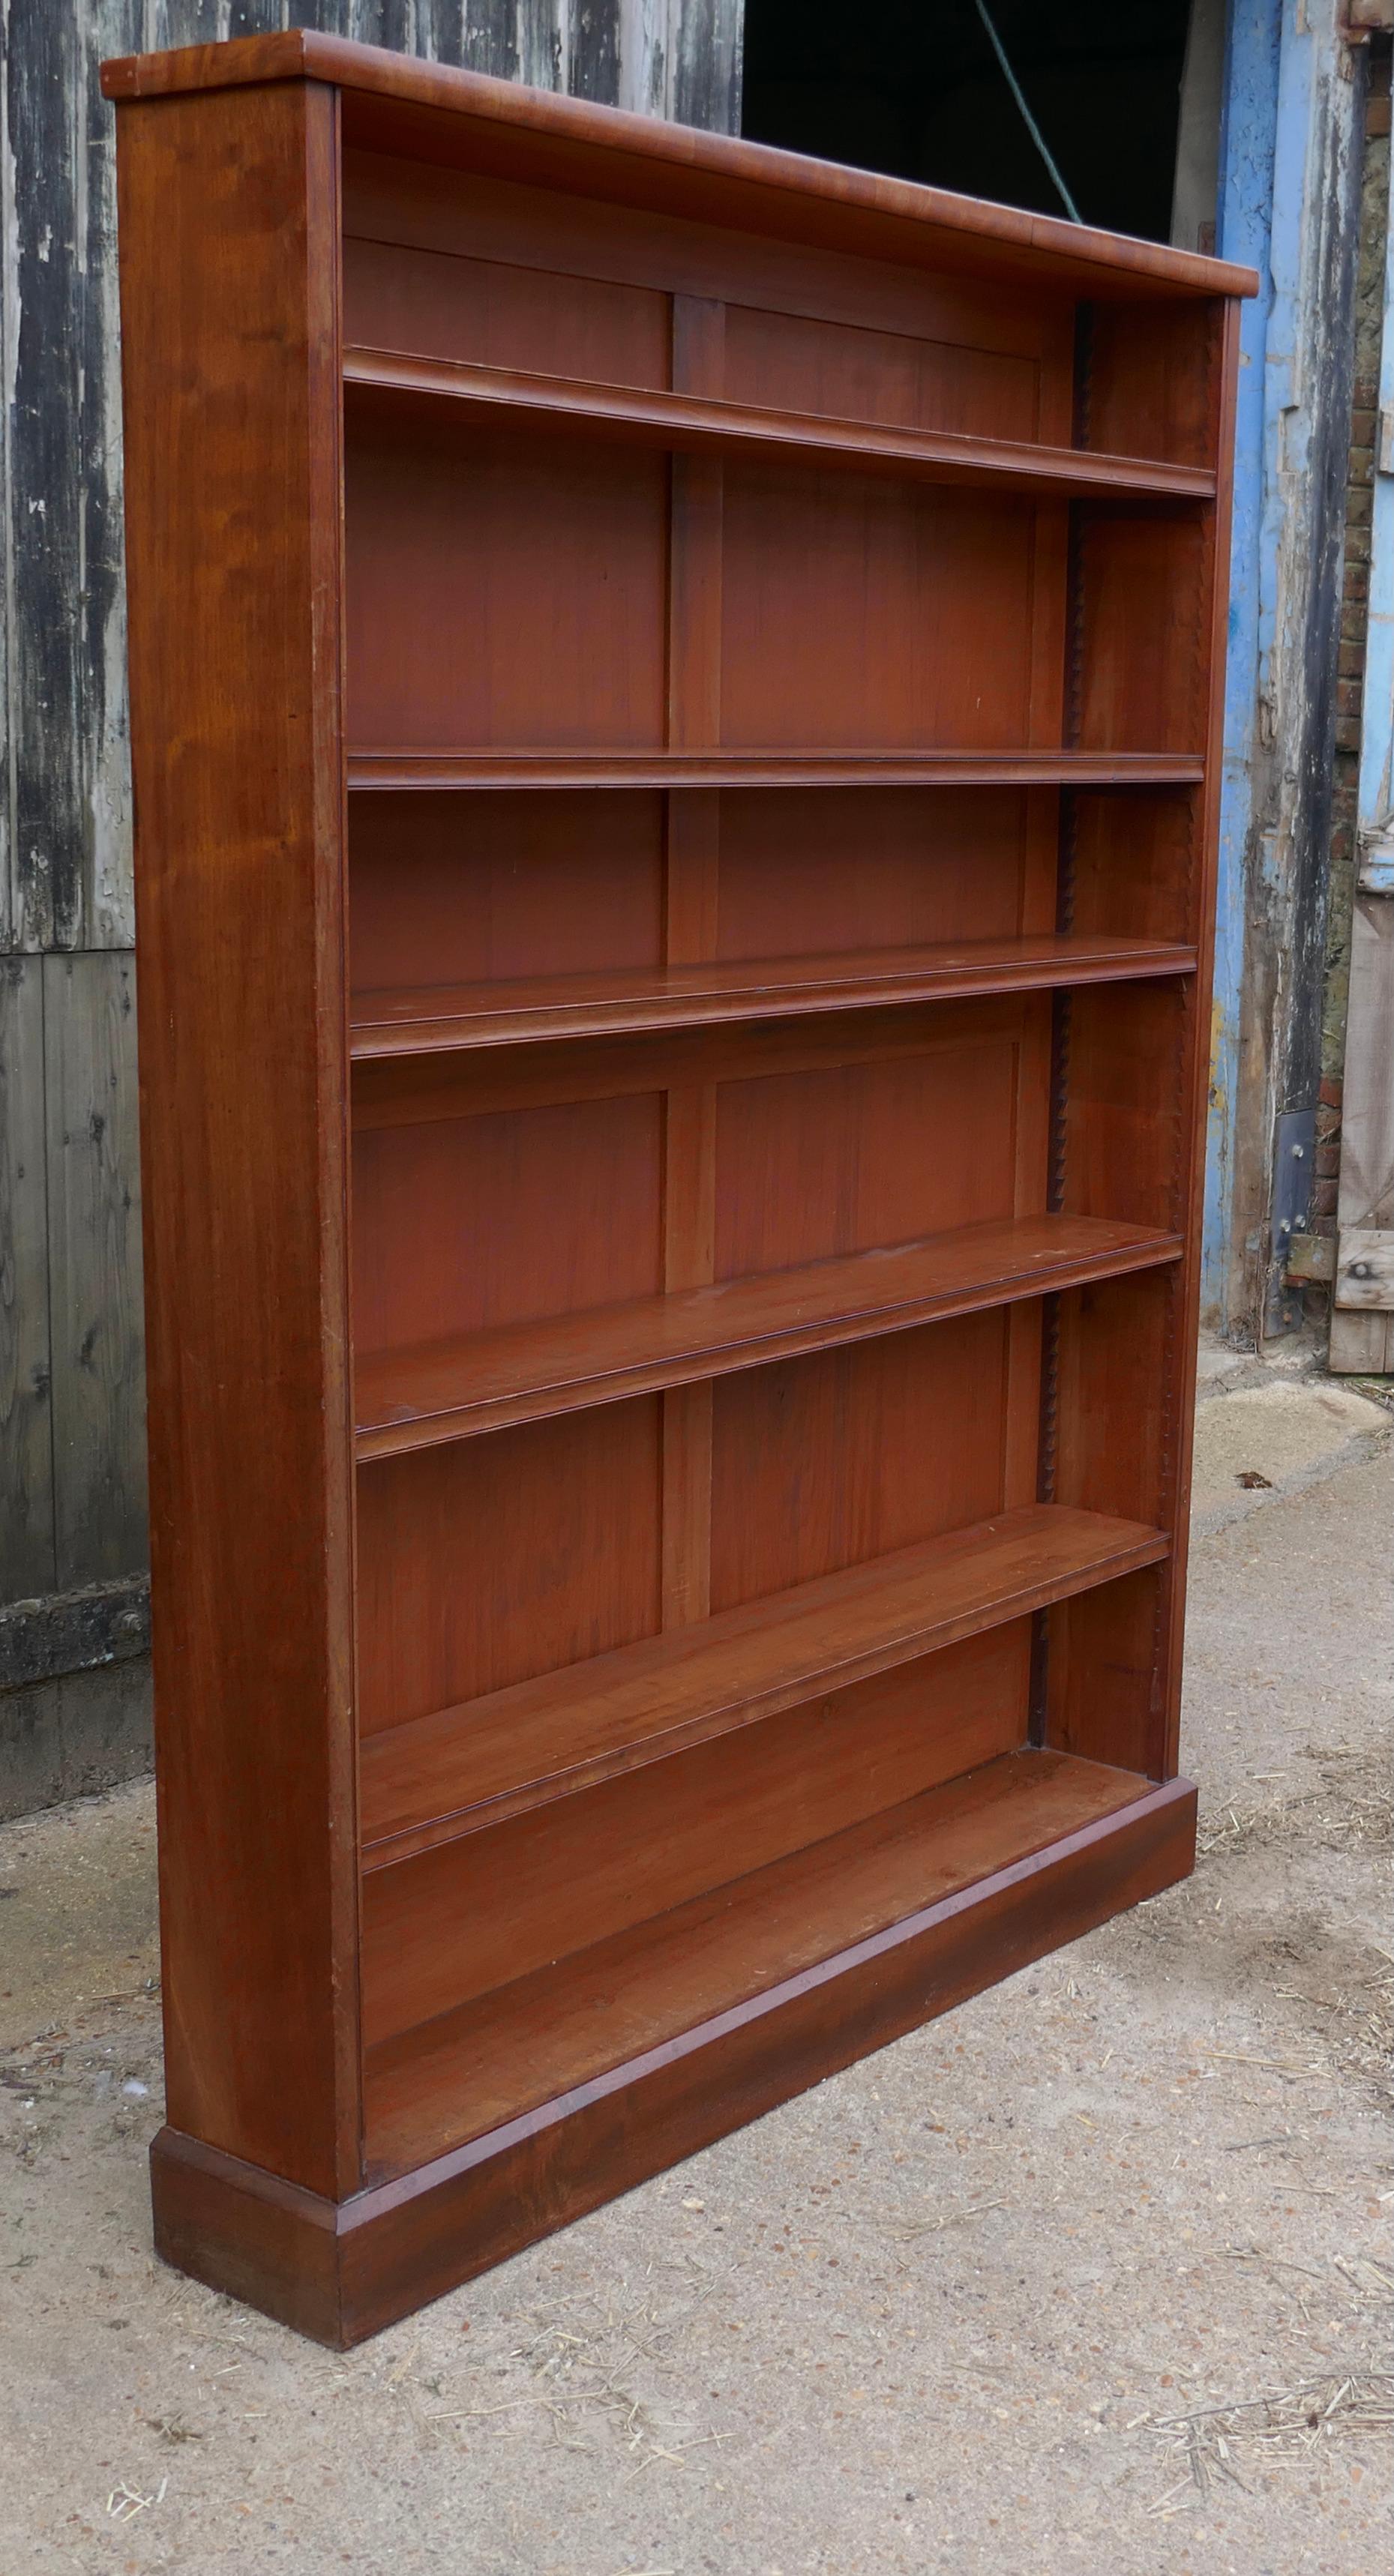 Victorian mahogany open book case.

This is an excellently quality piece, 
The book case is made in mahogany, it has 5 adjustable shelves these are moulded along the front and it stands on a sturdy plinth base
The Book shelf is in good condition